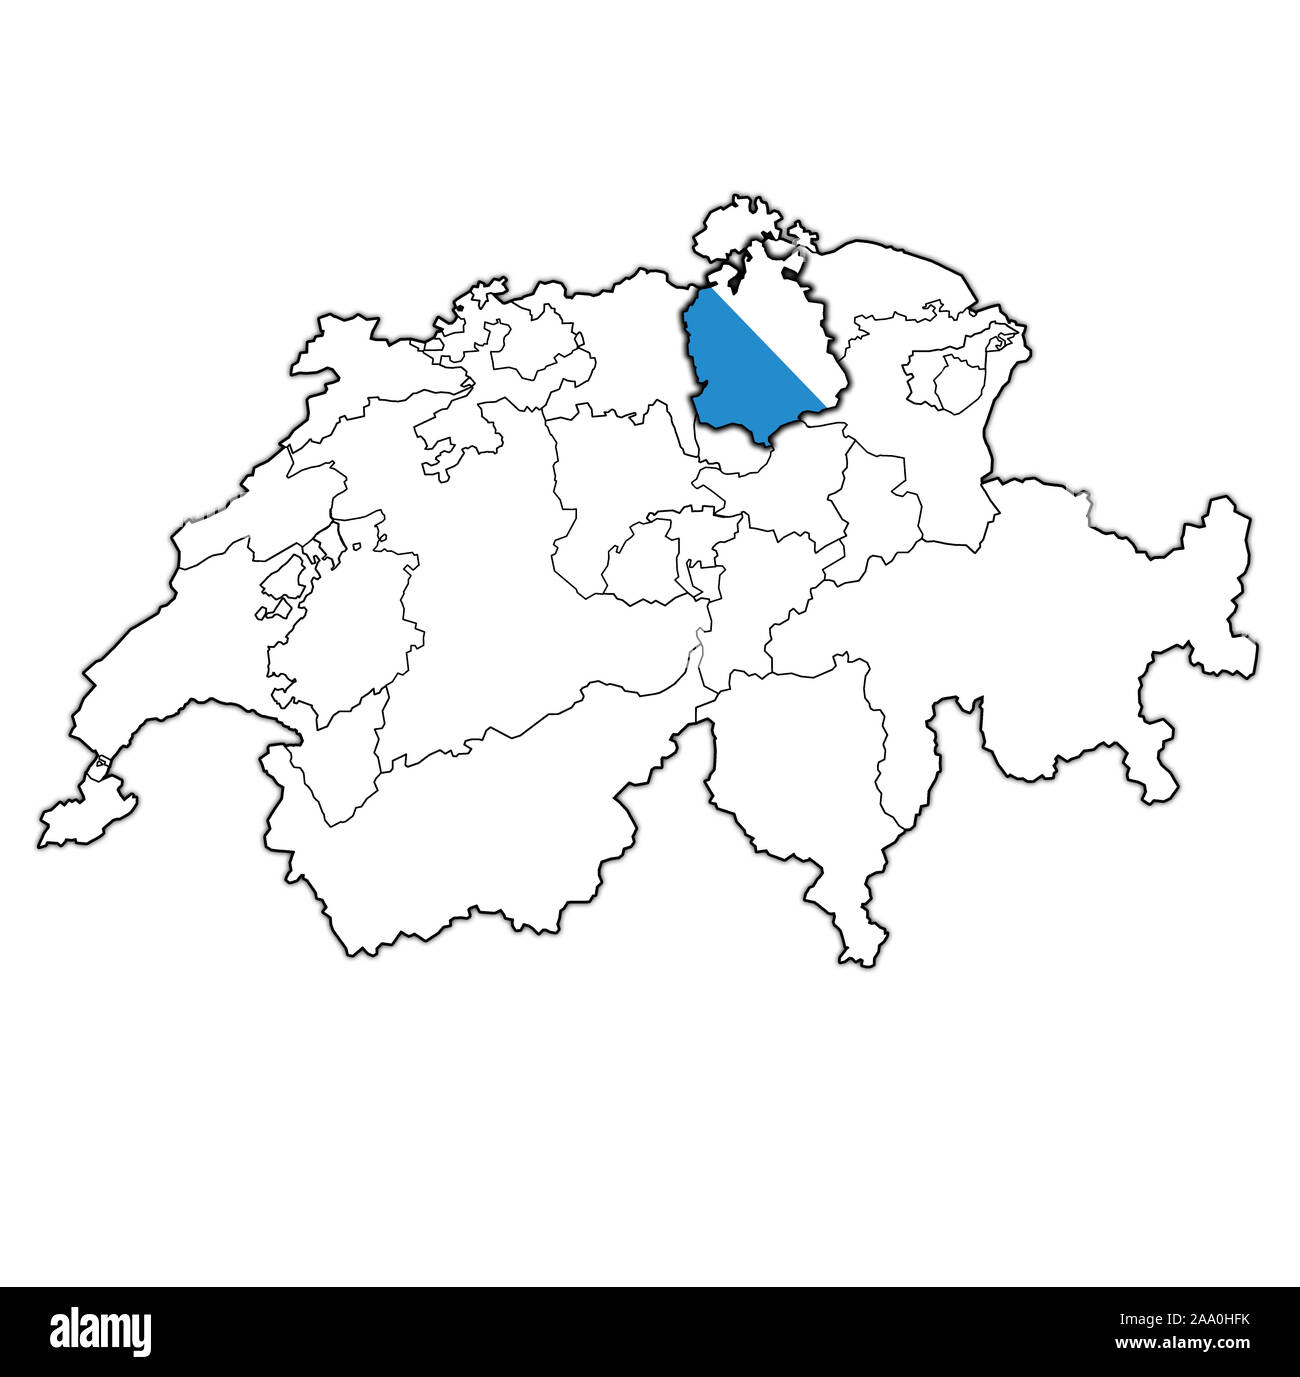 flag and territory of Zurich canton on map of administrative divisions of switzerland Stock Photo